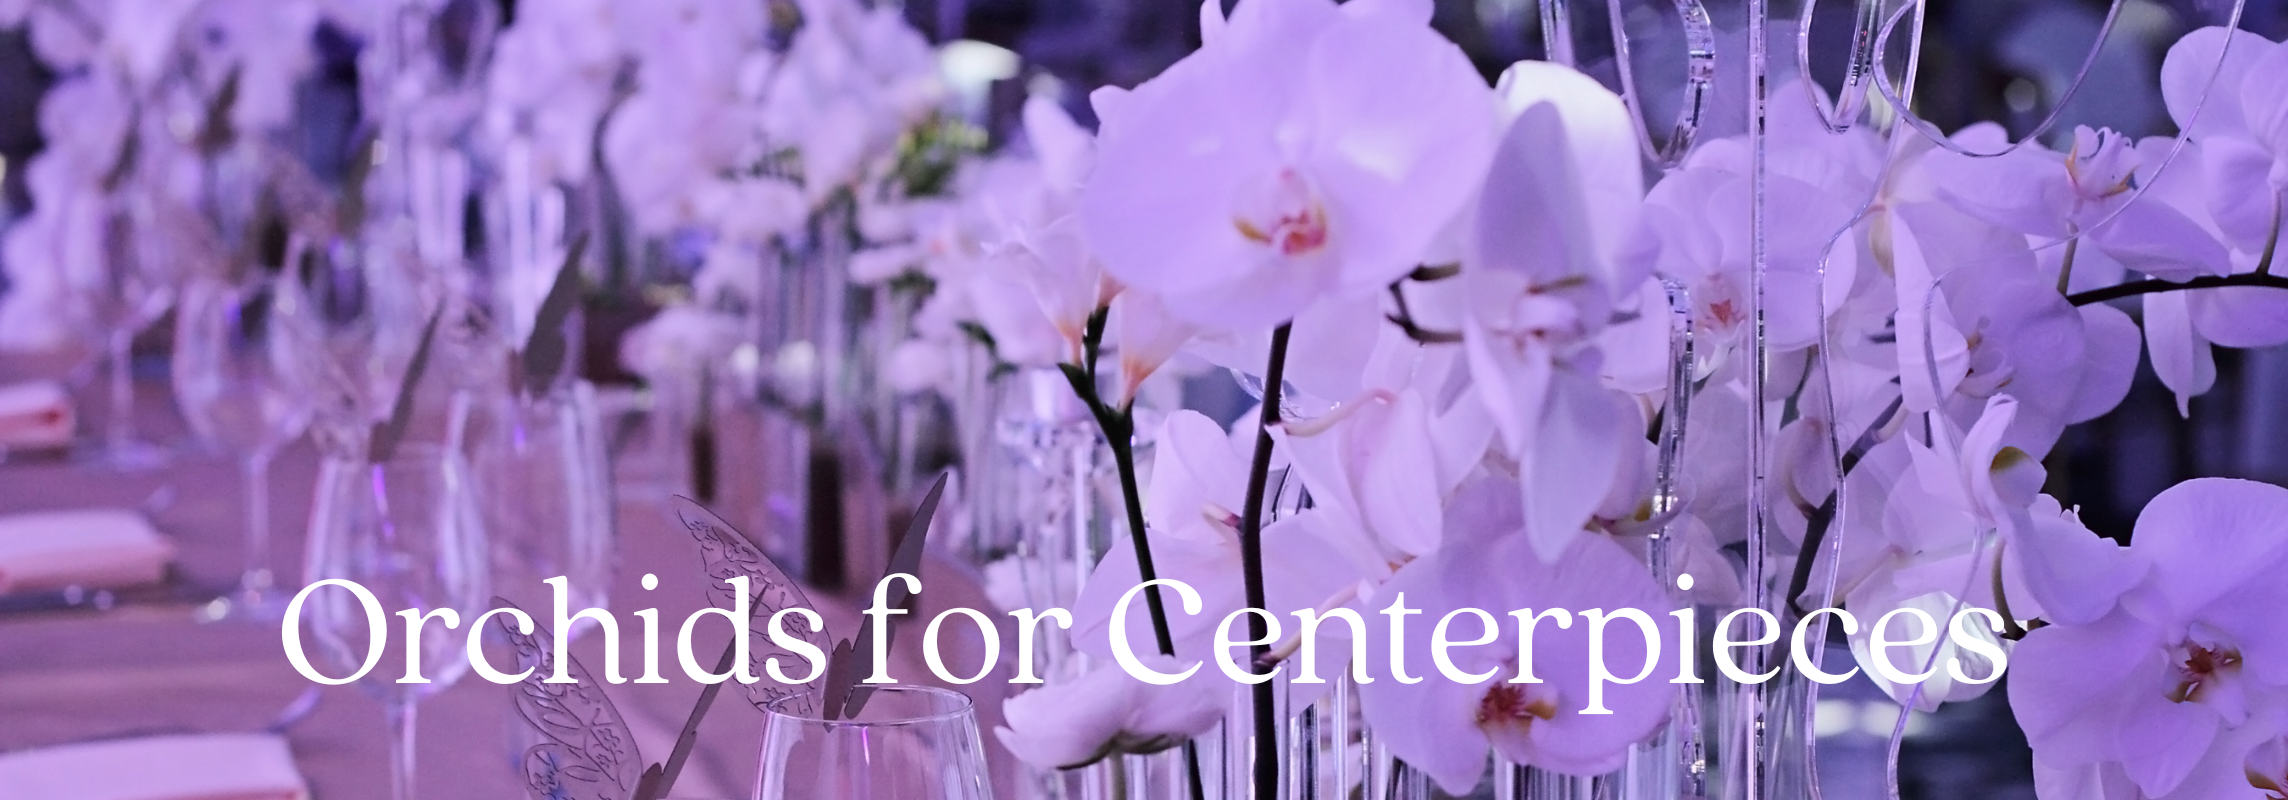 orchids for centerpieces